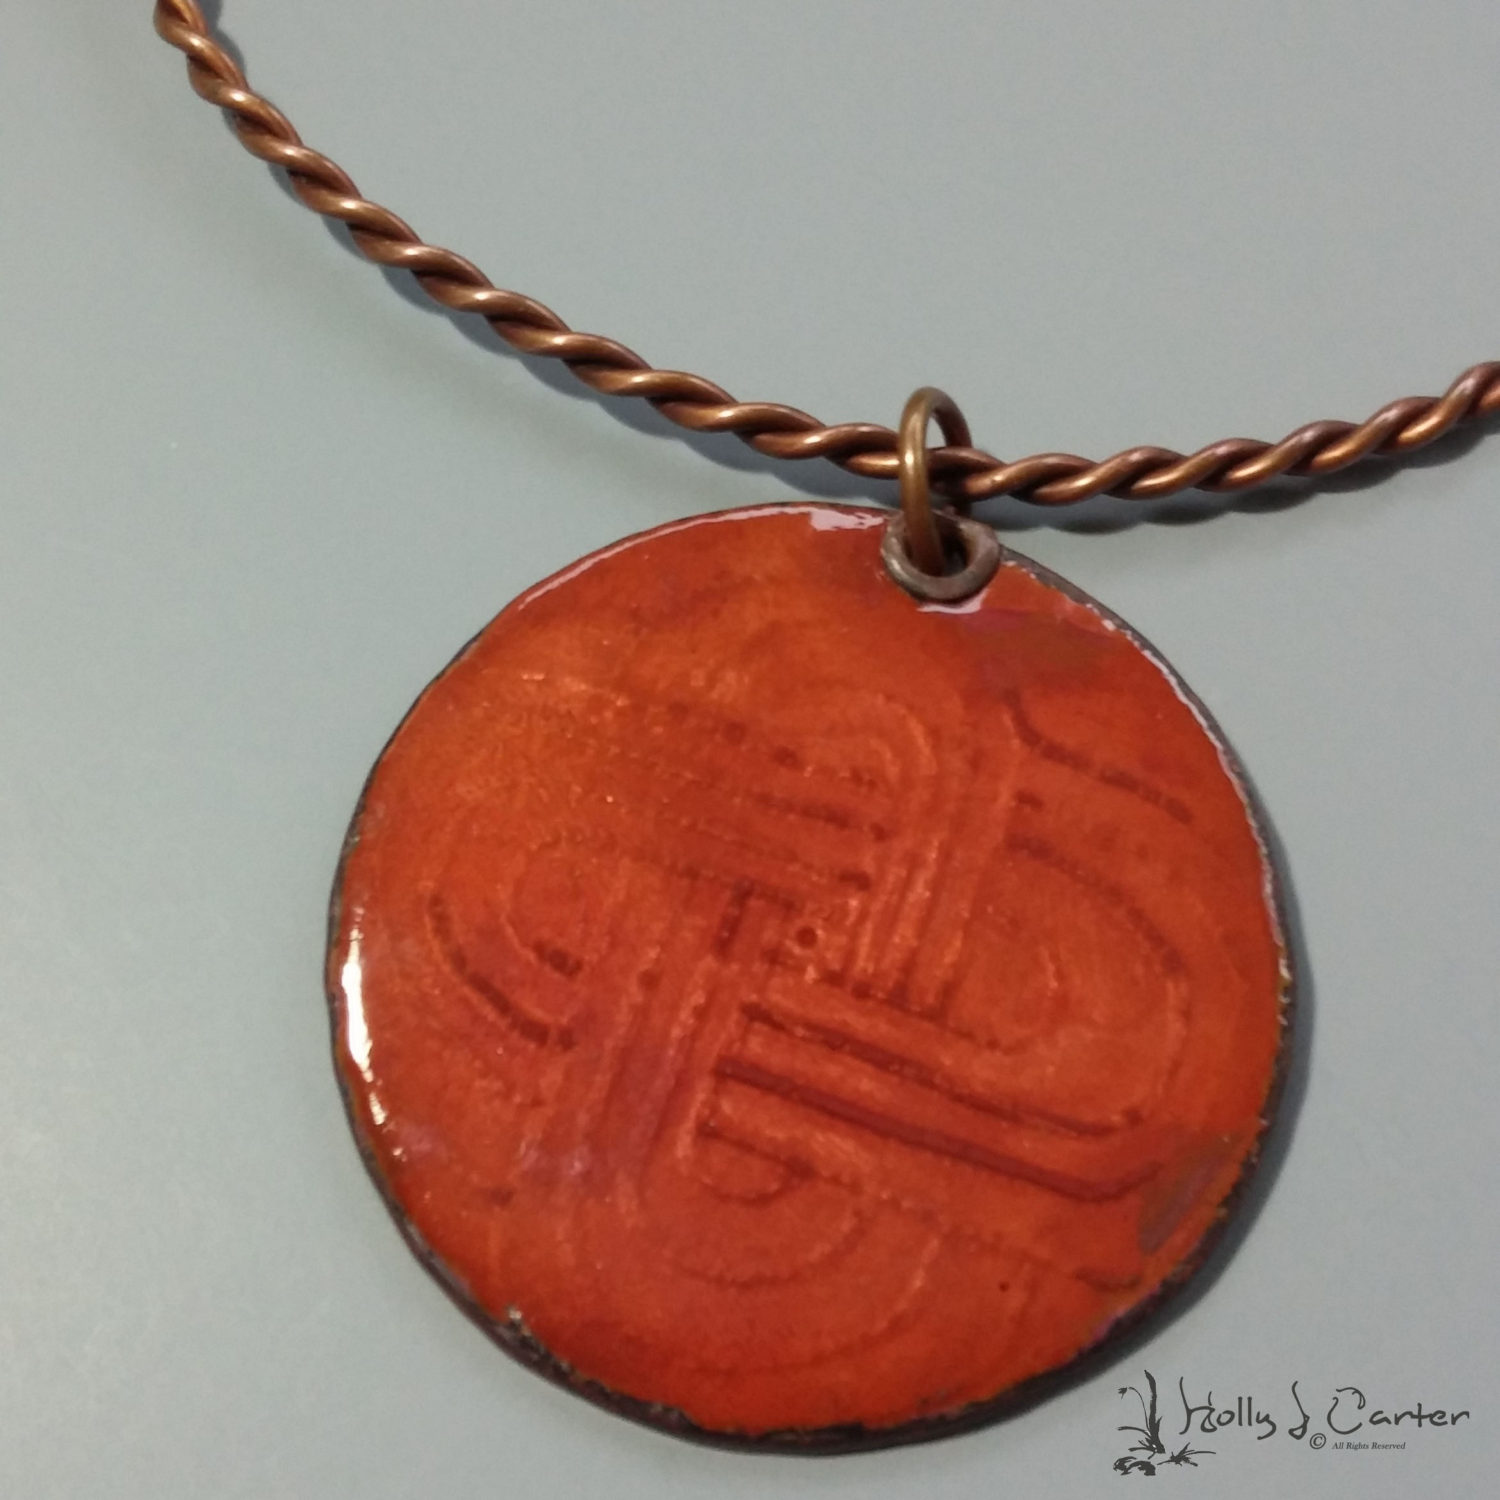 Maize Enameled Copper Pendant/Necklace by Holly J Carter